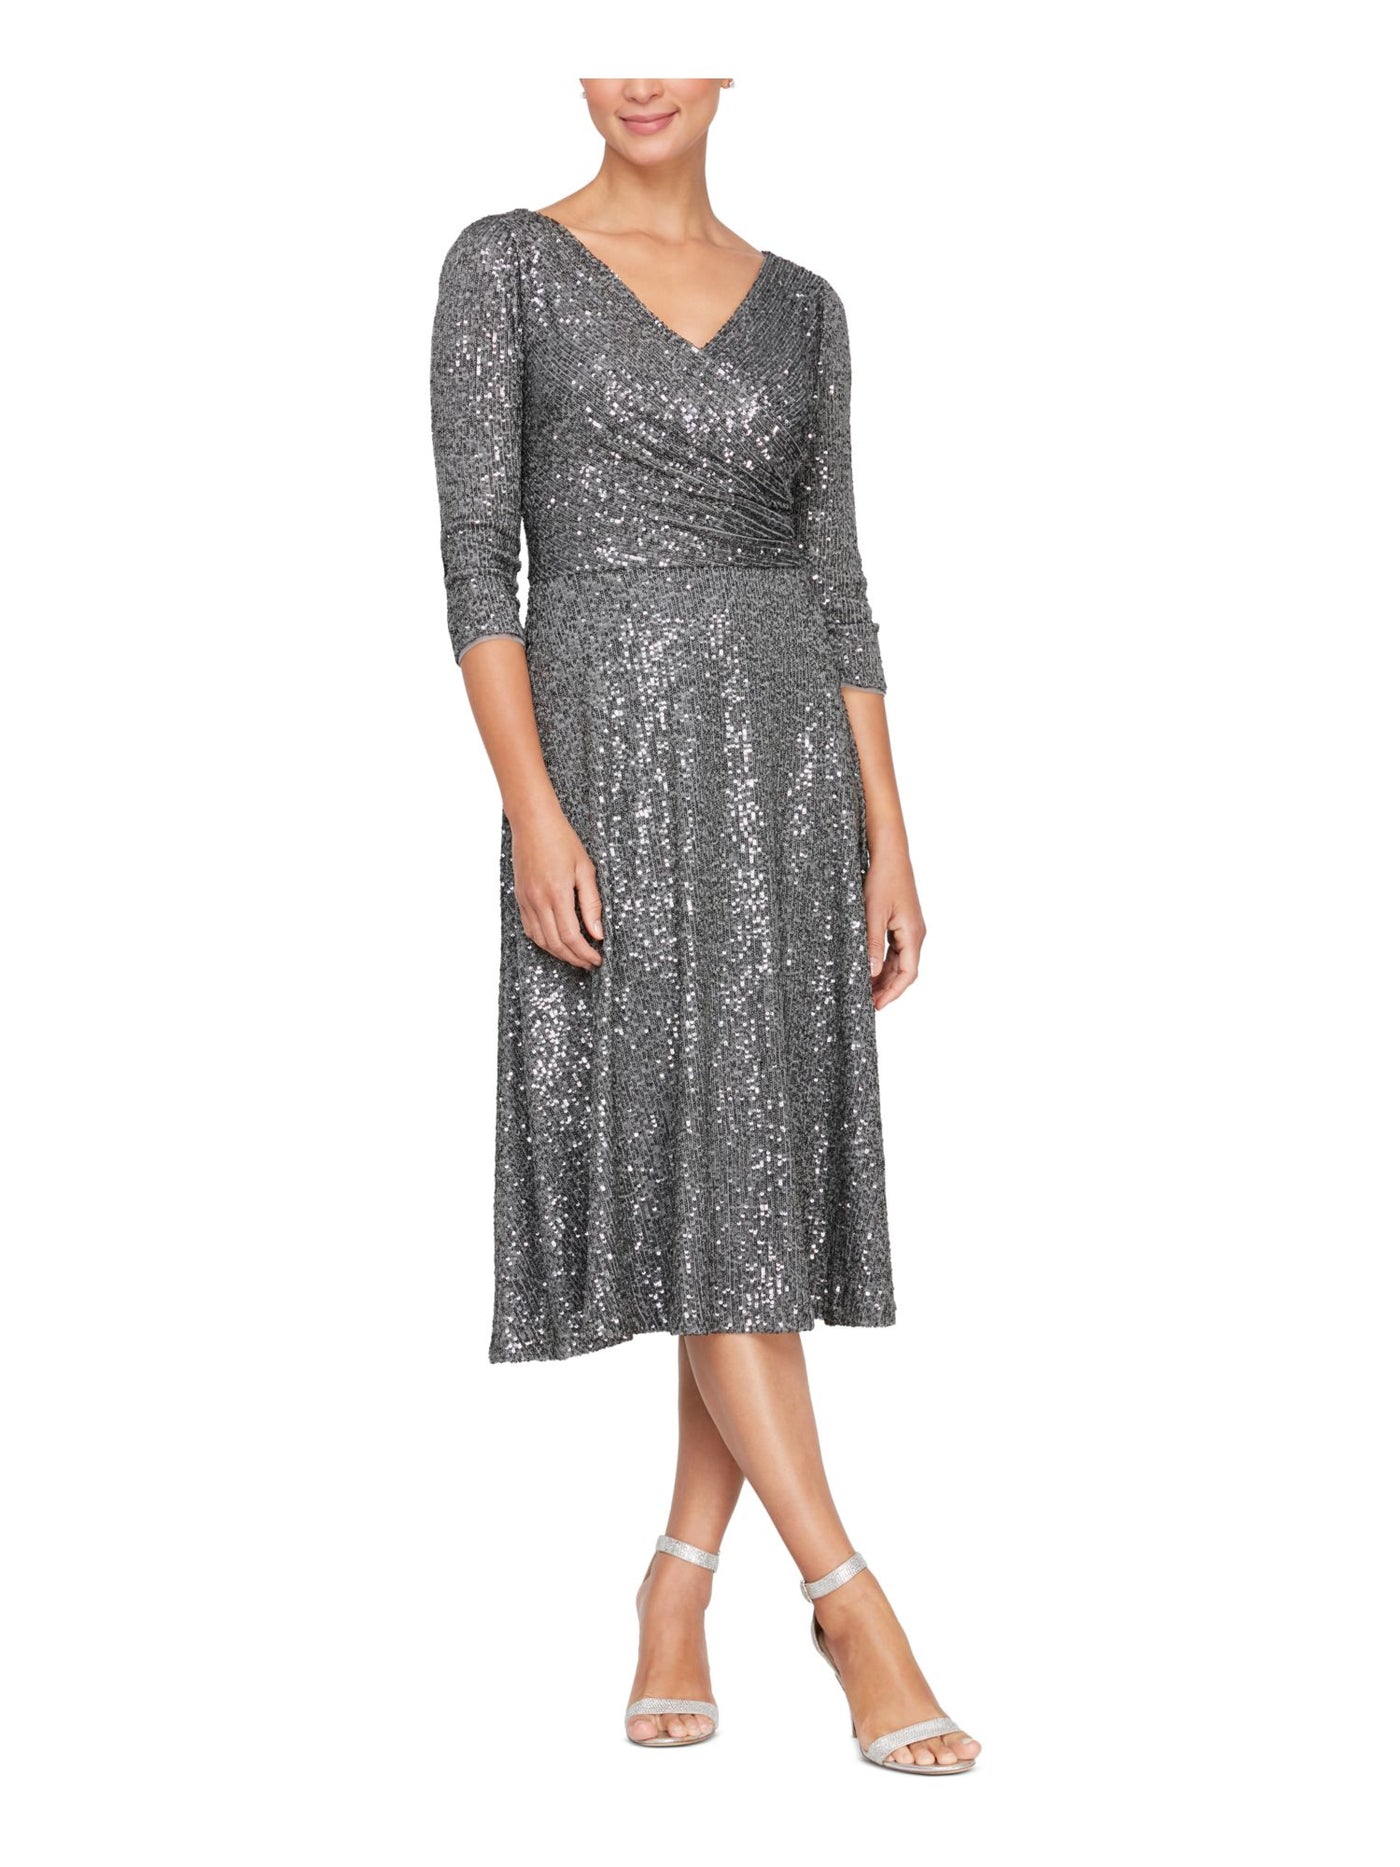 ALEX EVENINGS Womens Gray Sequined Zippered Lined Pleated 3/4 Sleeve Surplice Neckline Midi Evening Fit + Flare Dress 8